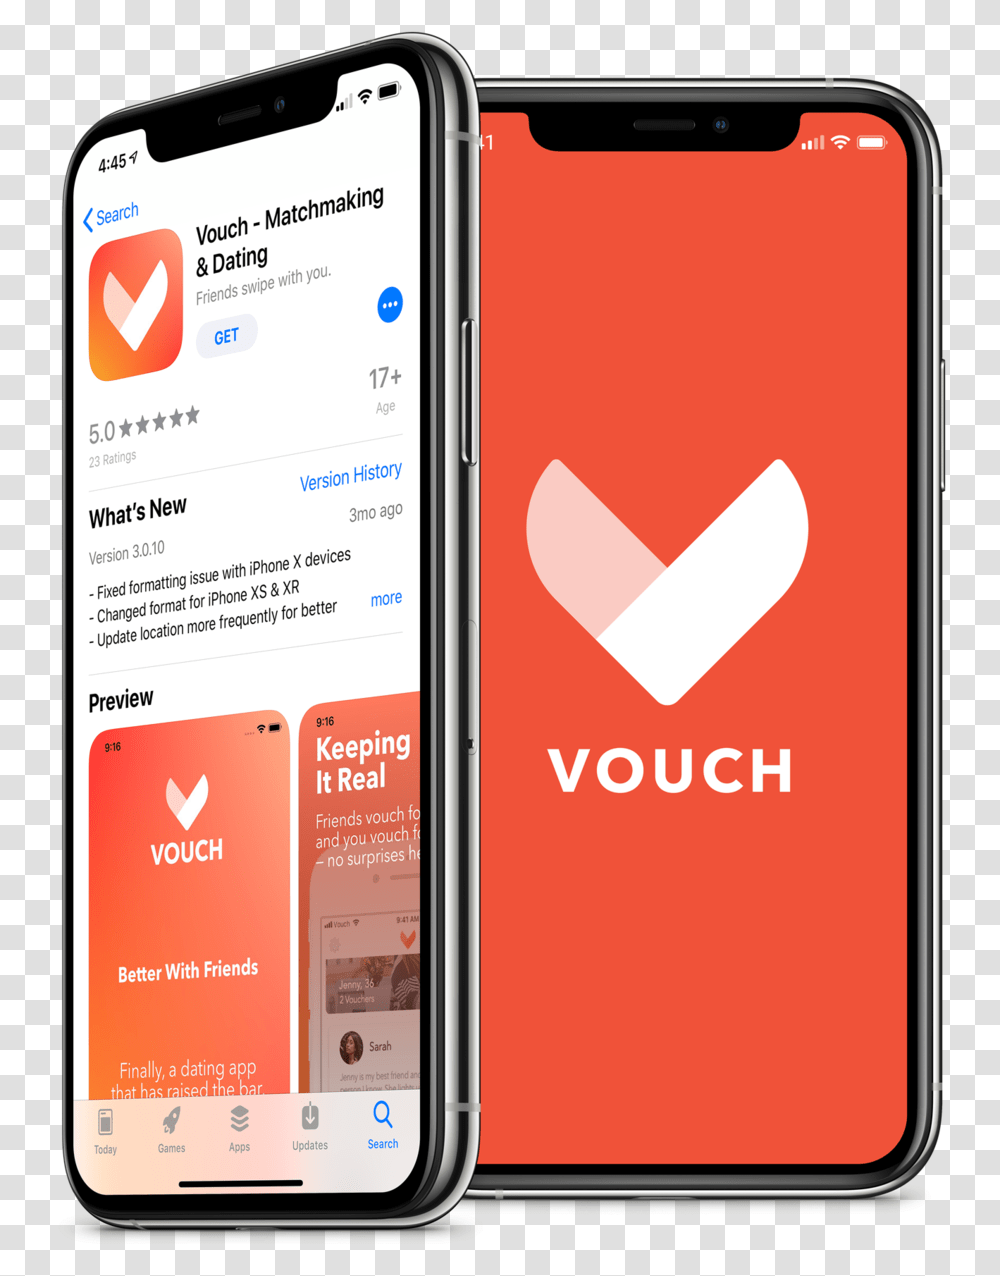 Vouch The Social Matchmaking & Dating App Available For Ios Smartphone, Mobile Phone, Electronics, Cell Phone, Iphone Transparent Png